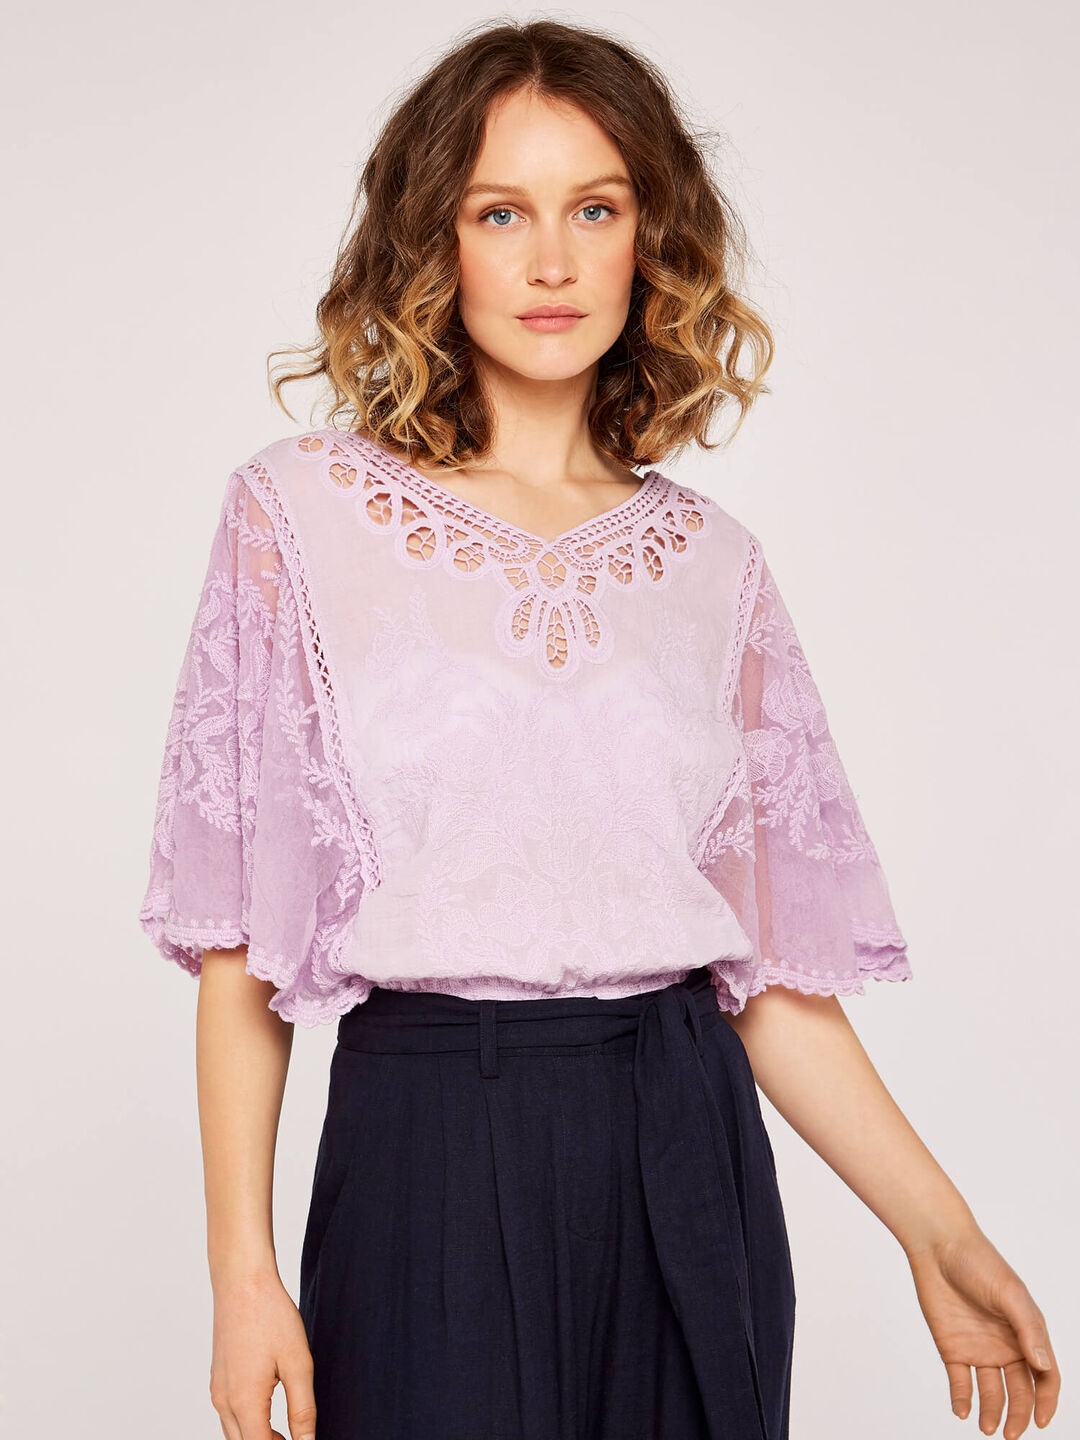 Floral Embroidery Top with Lace